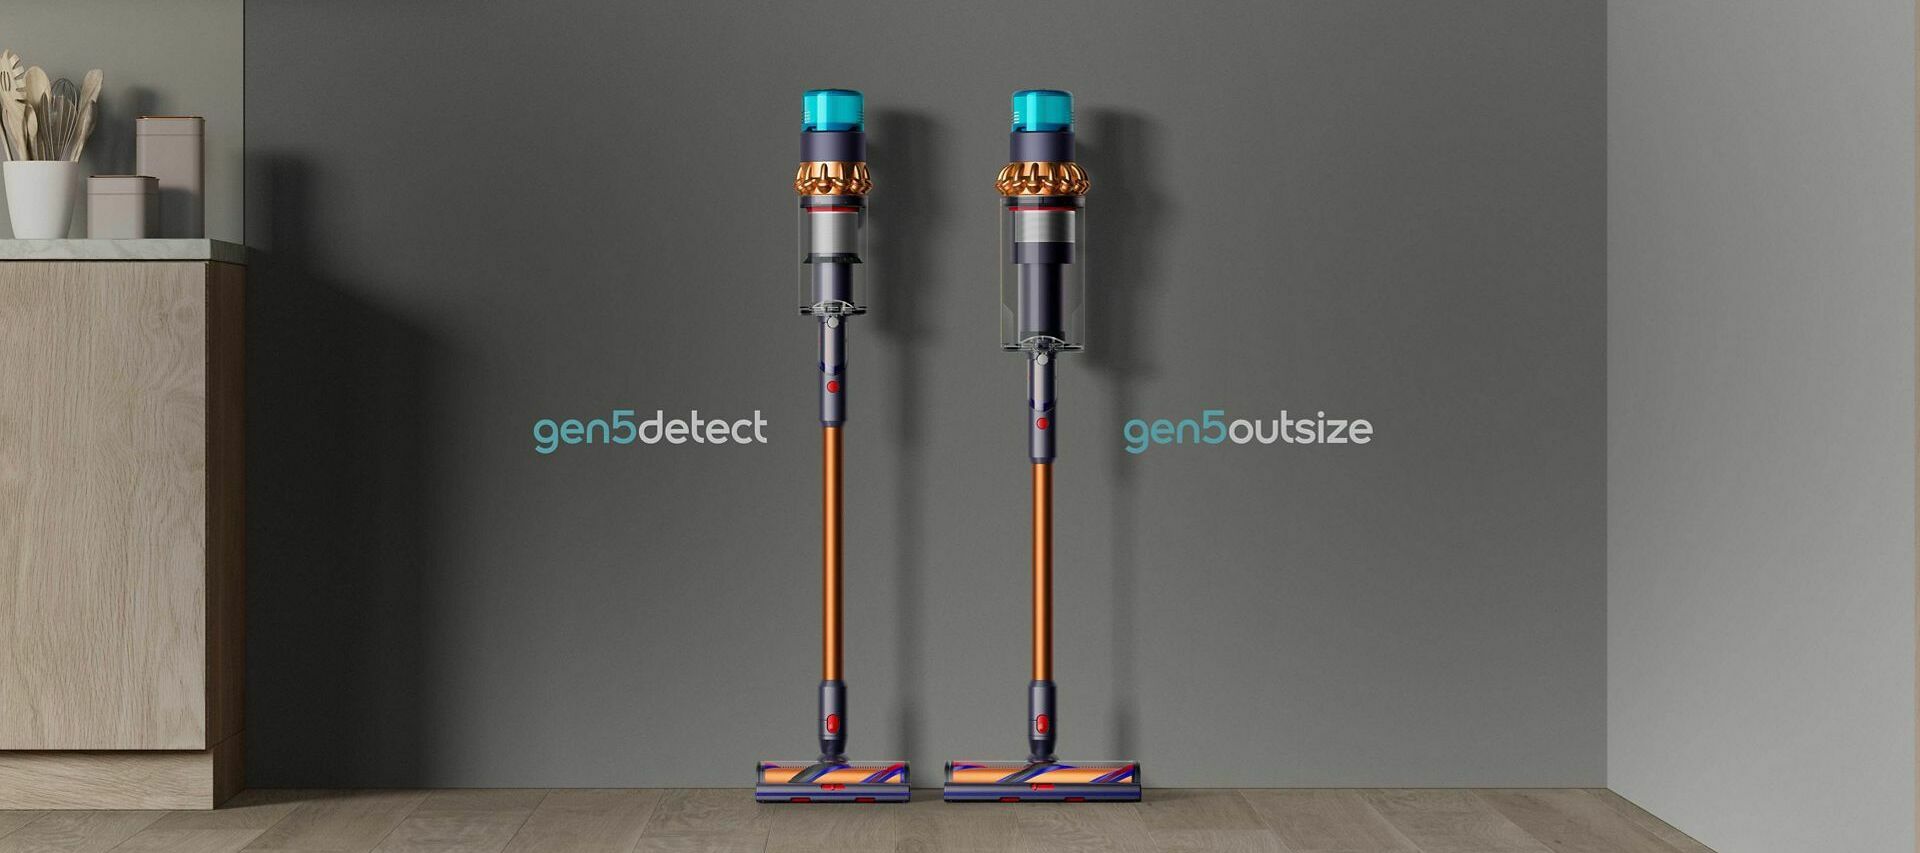 Gen5detect™ - Now available in the US